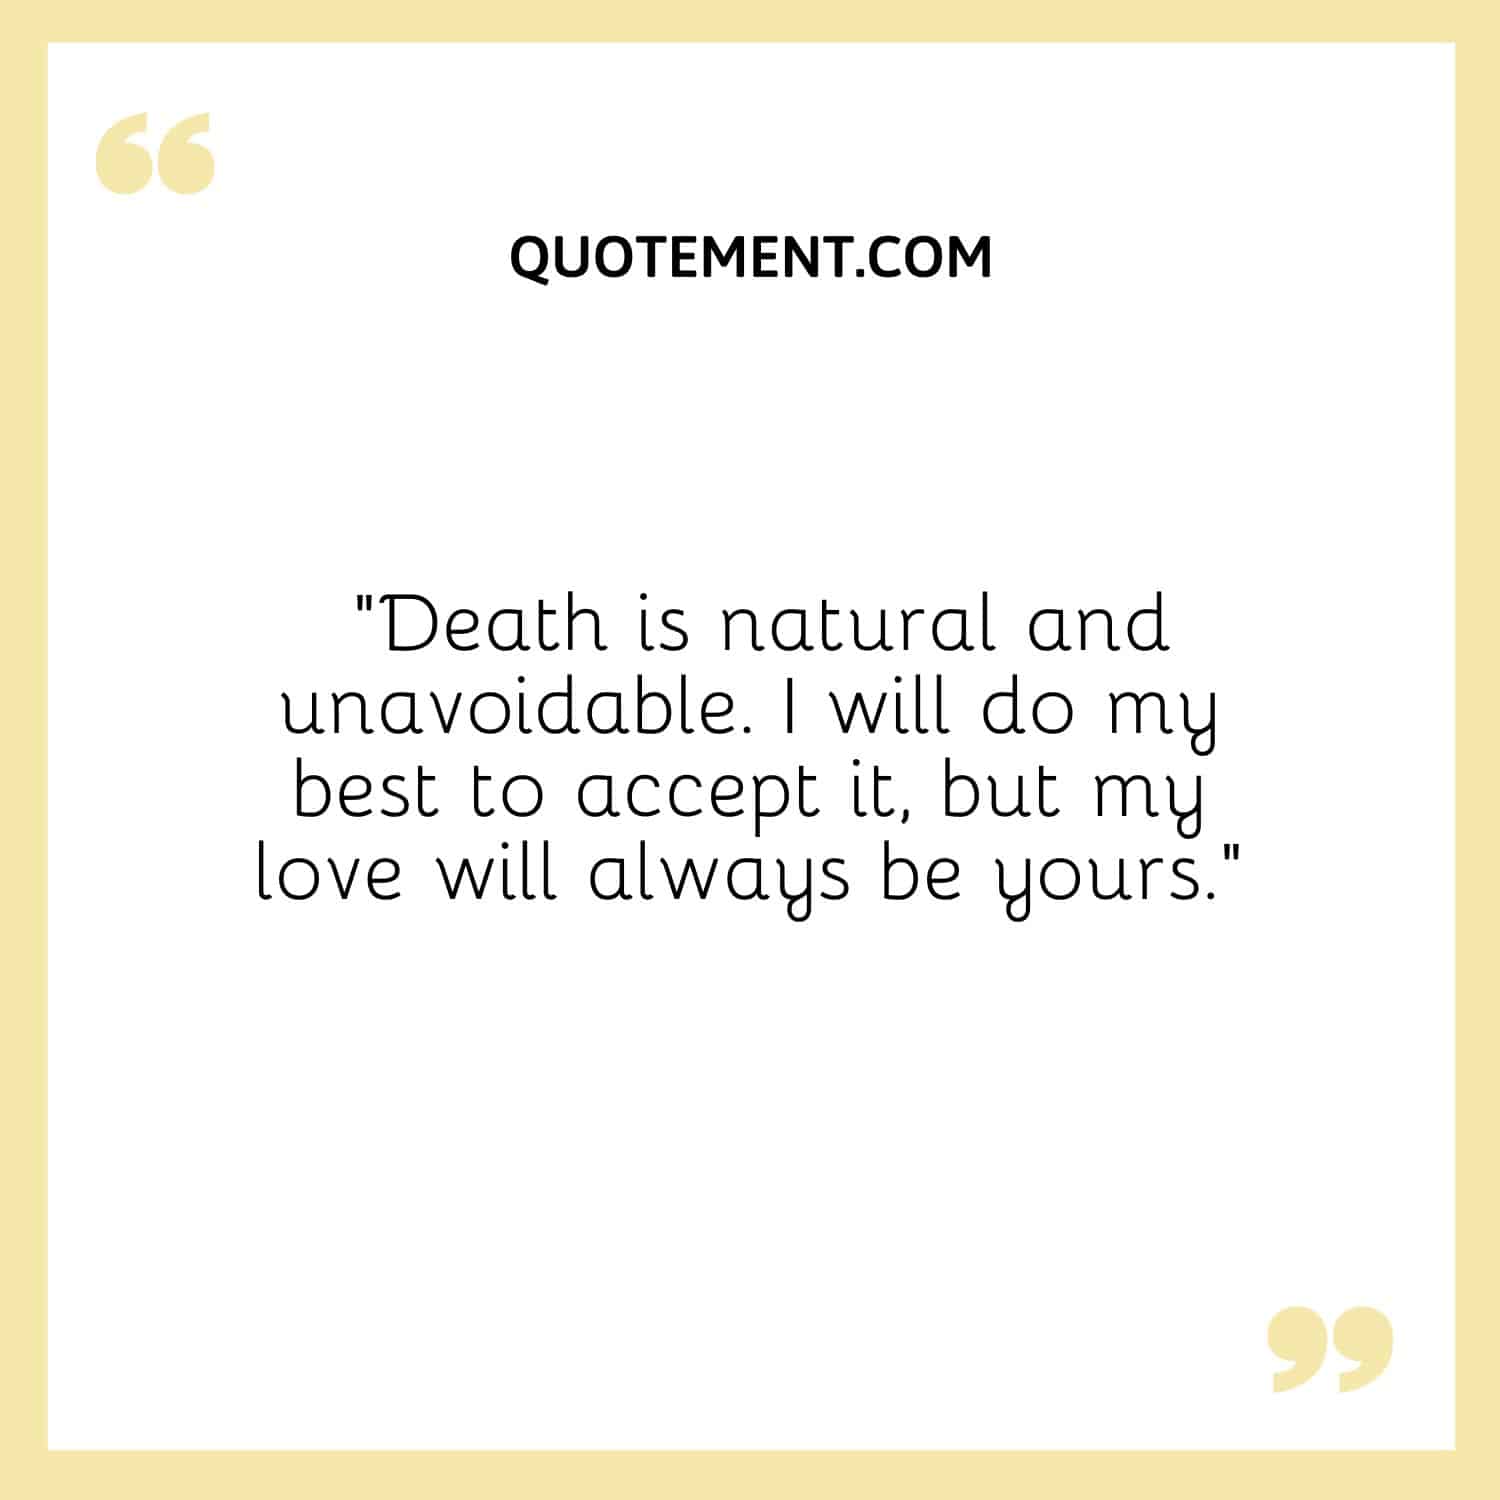 Death is natural and unavoidable